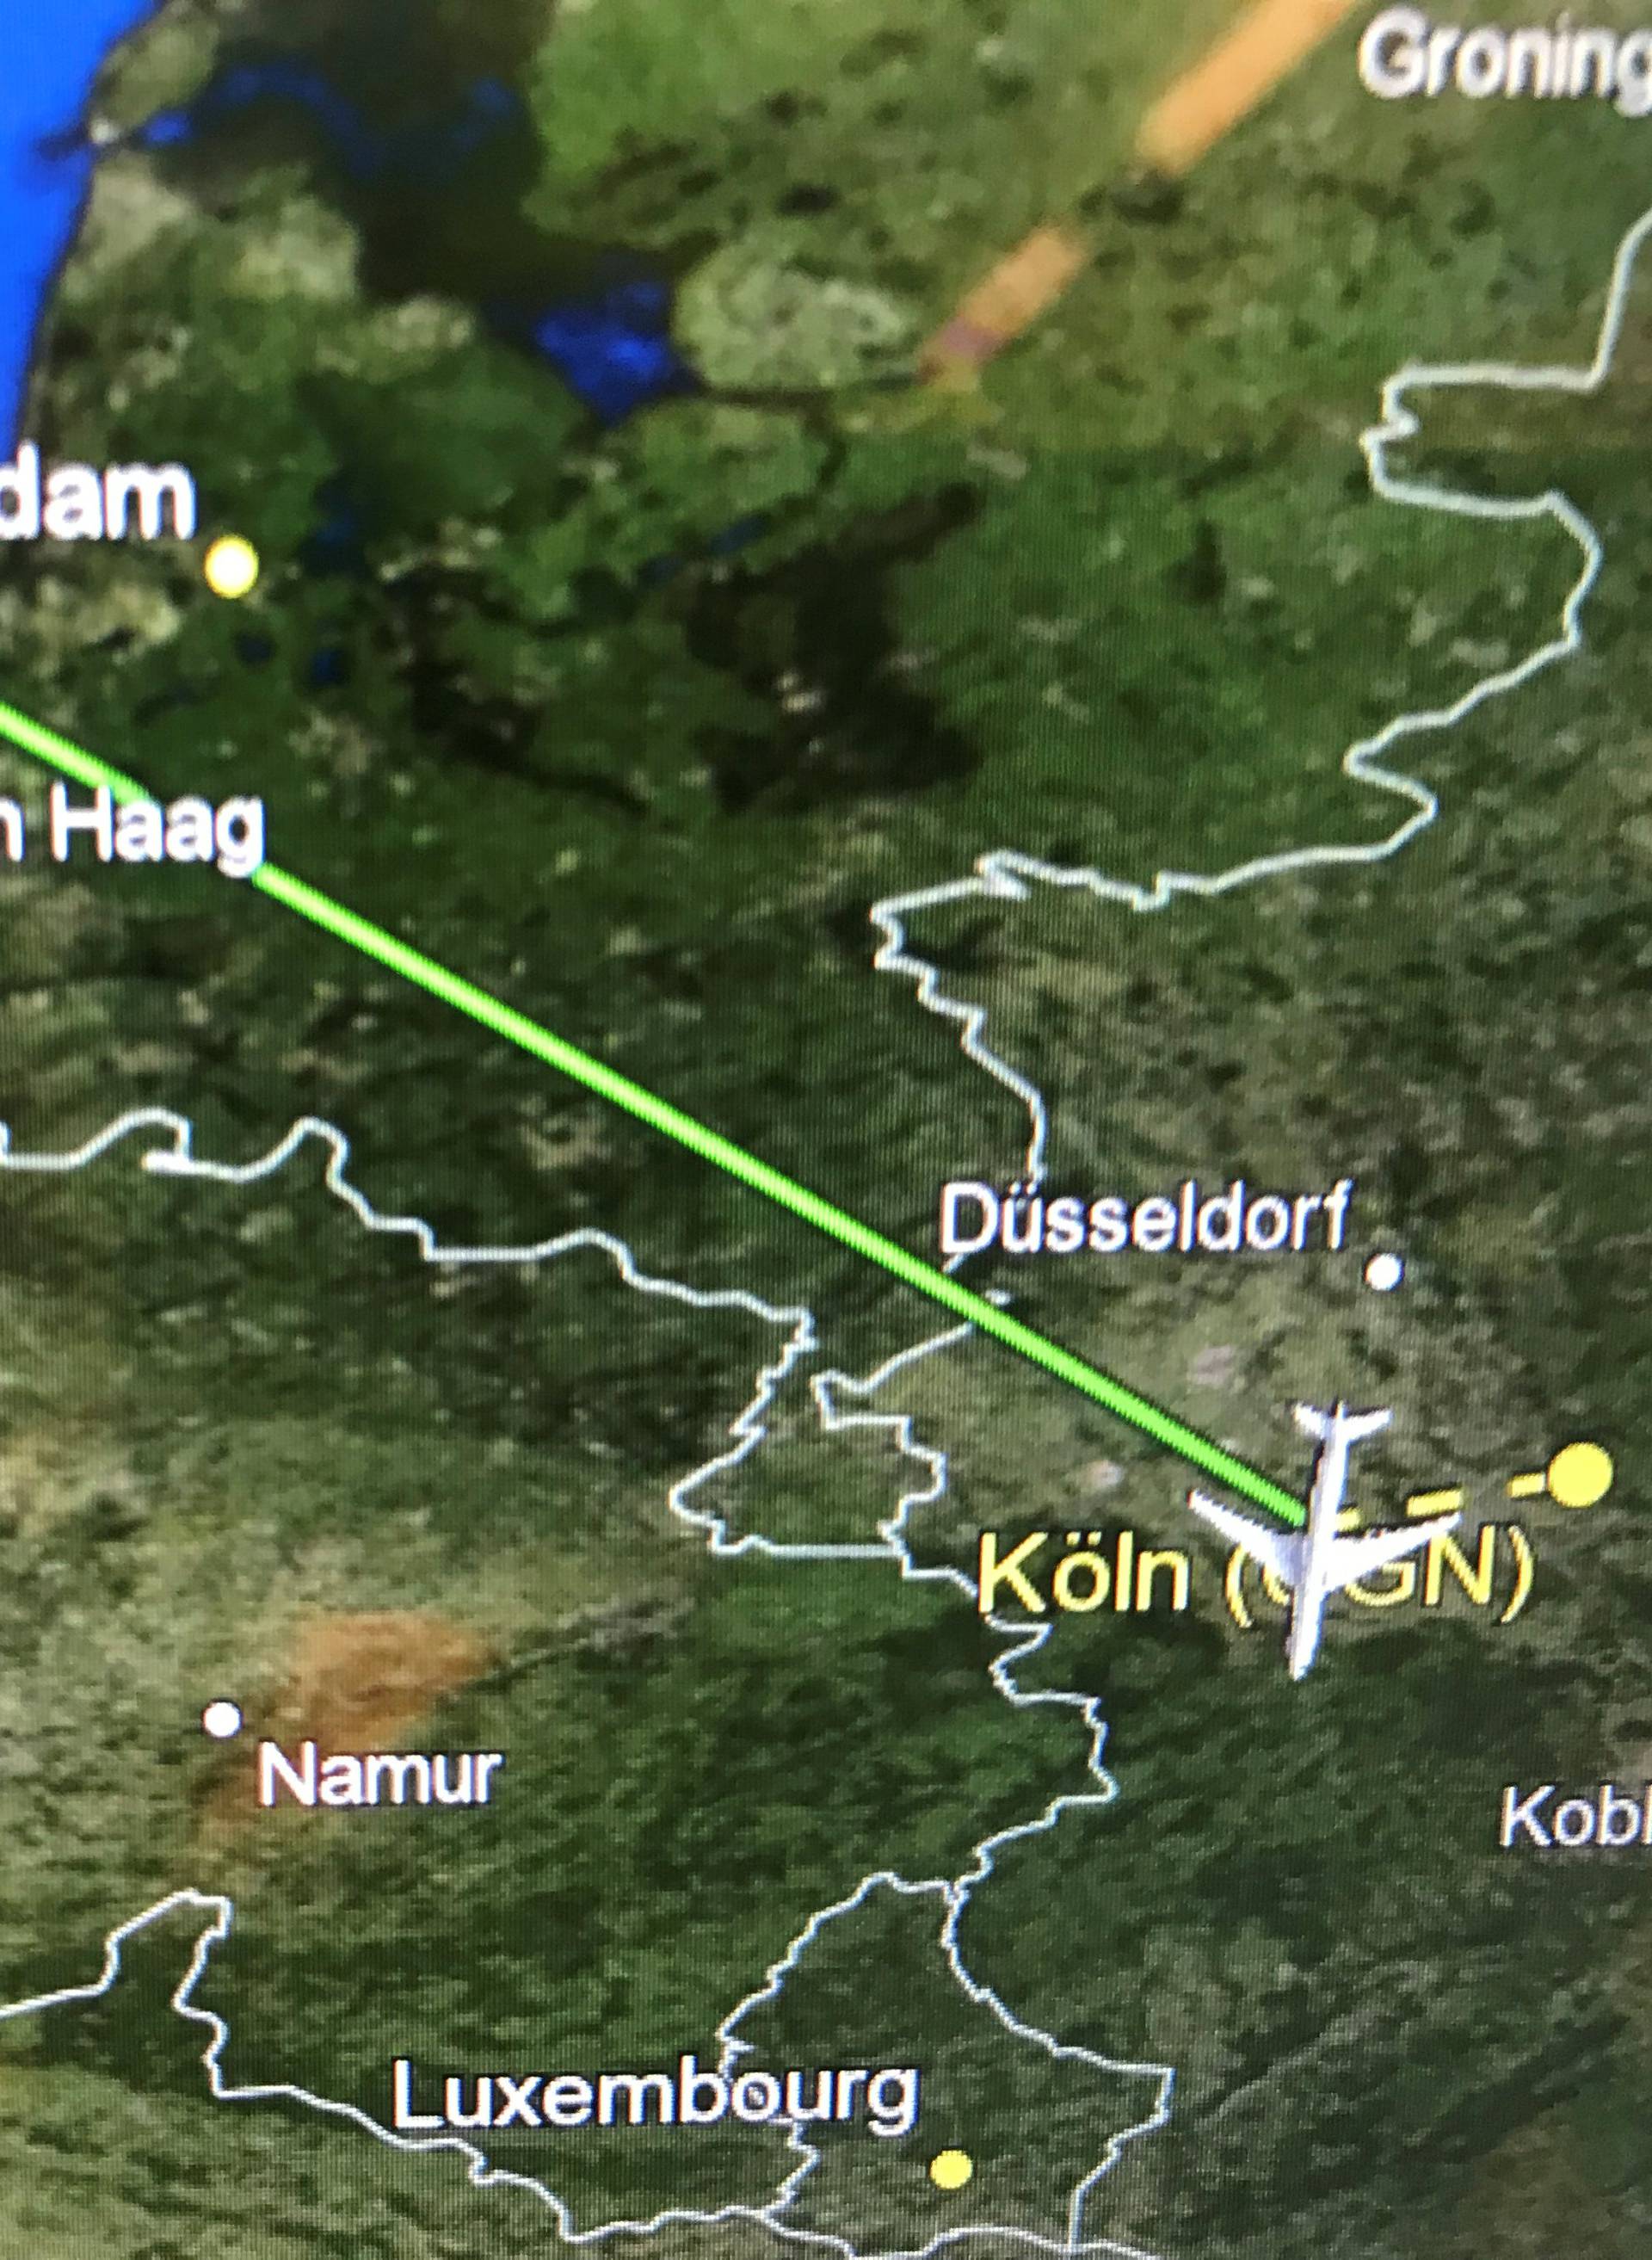 A picture shows the flight path of the Airbus A340 government aircraft carrying Chancellor Angela Merkel